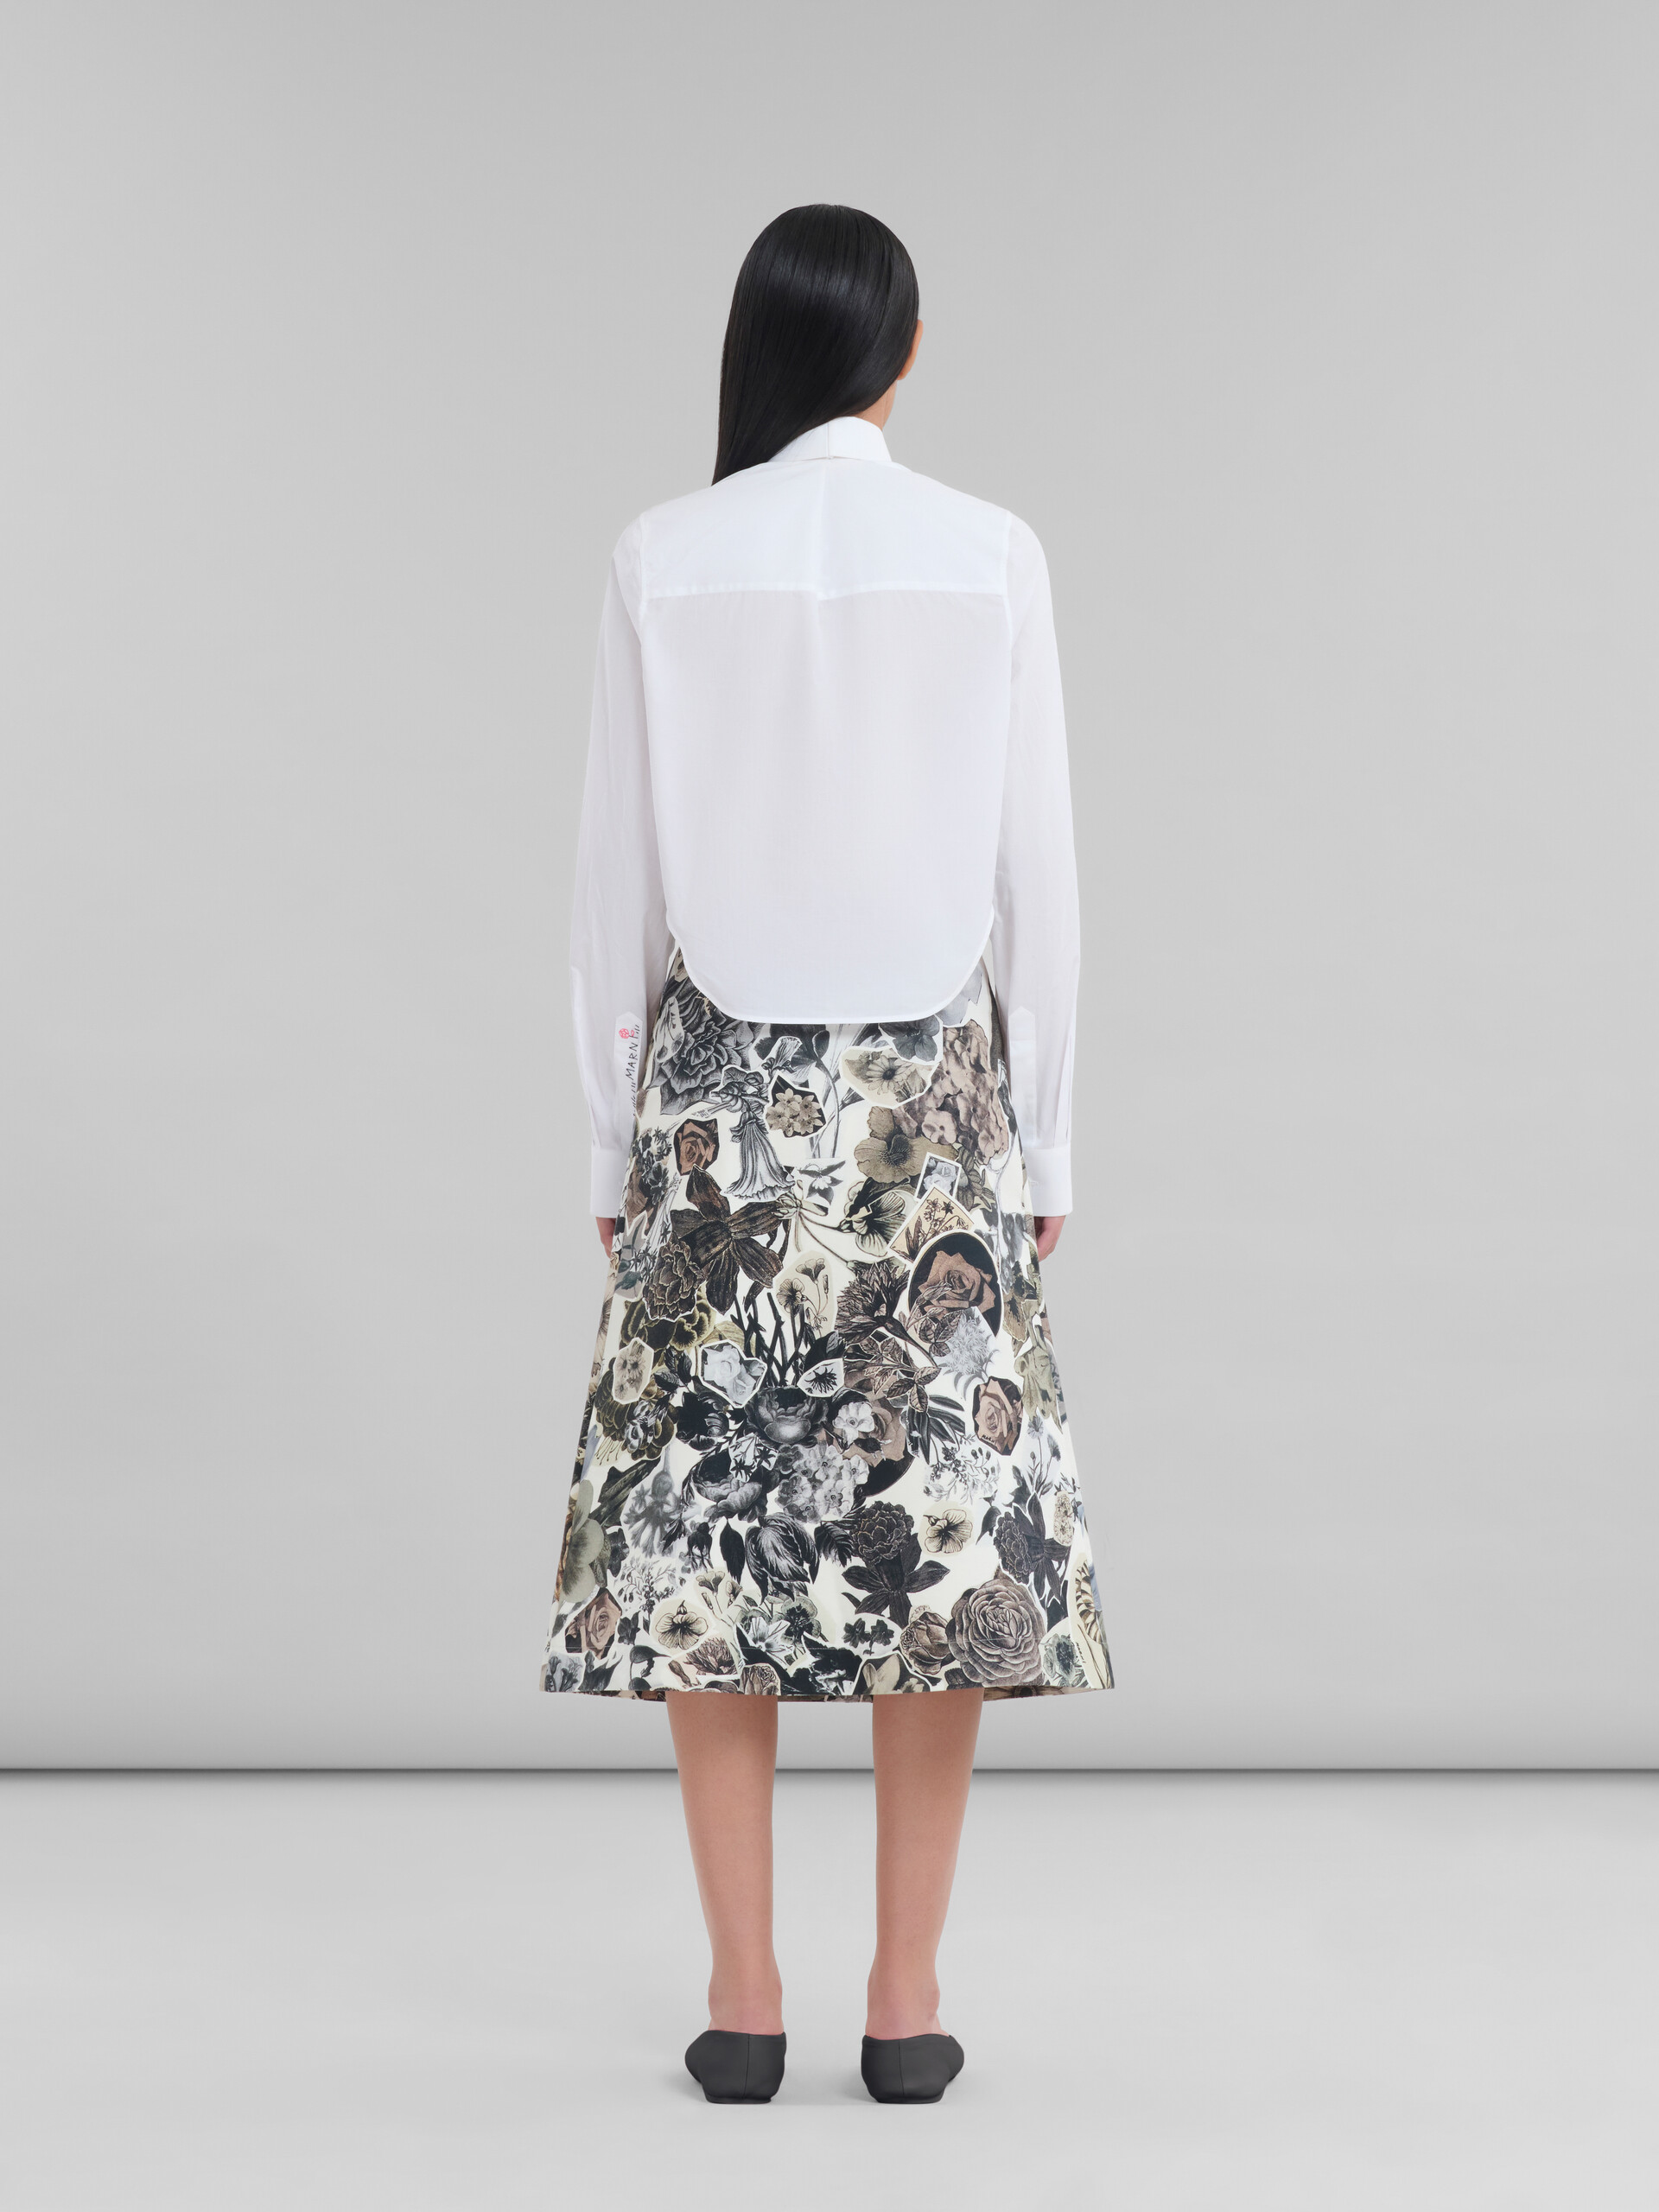 Black and white A-line skirt with Nocturnal print - Skirts - Image 3